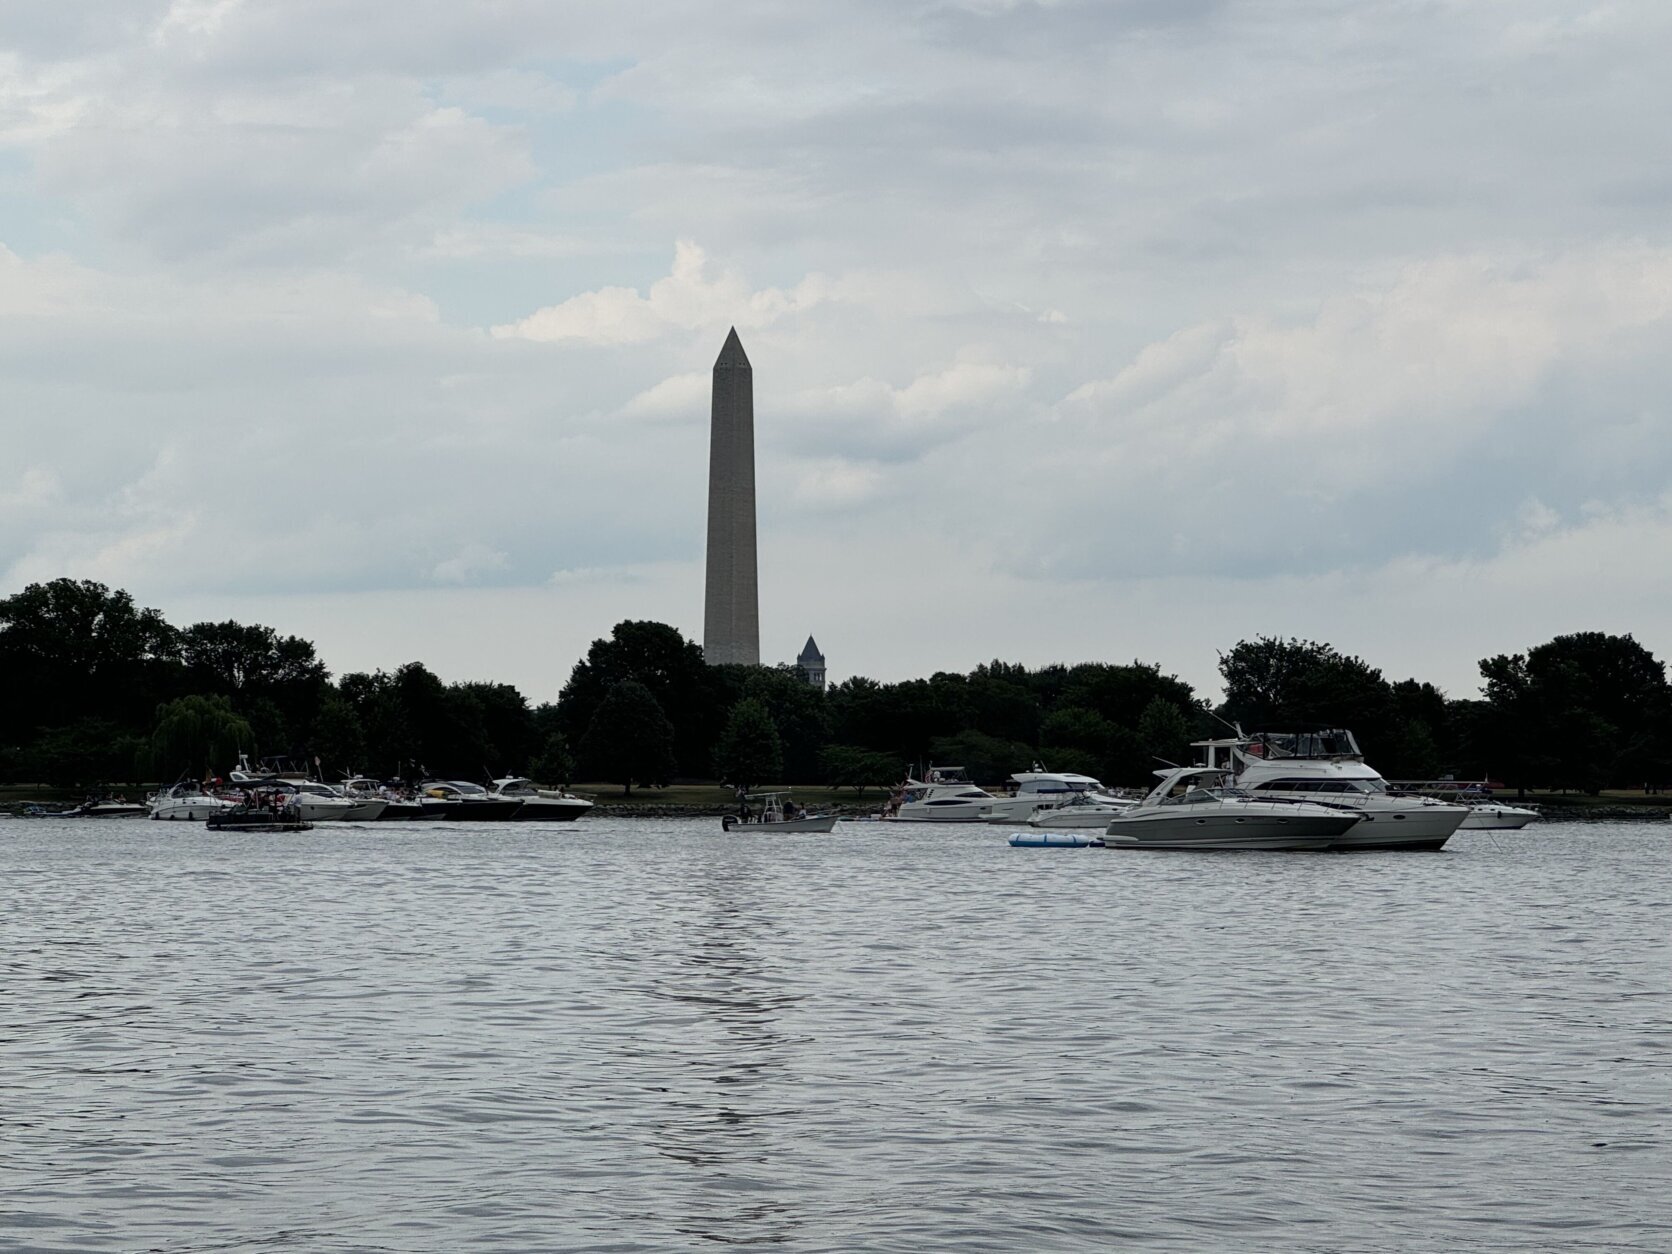 a view of the washington monument from the water